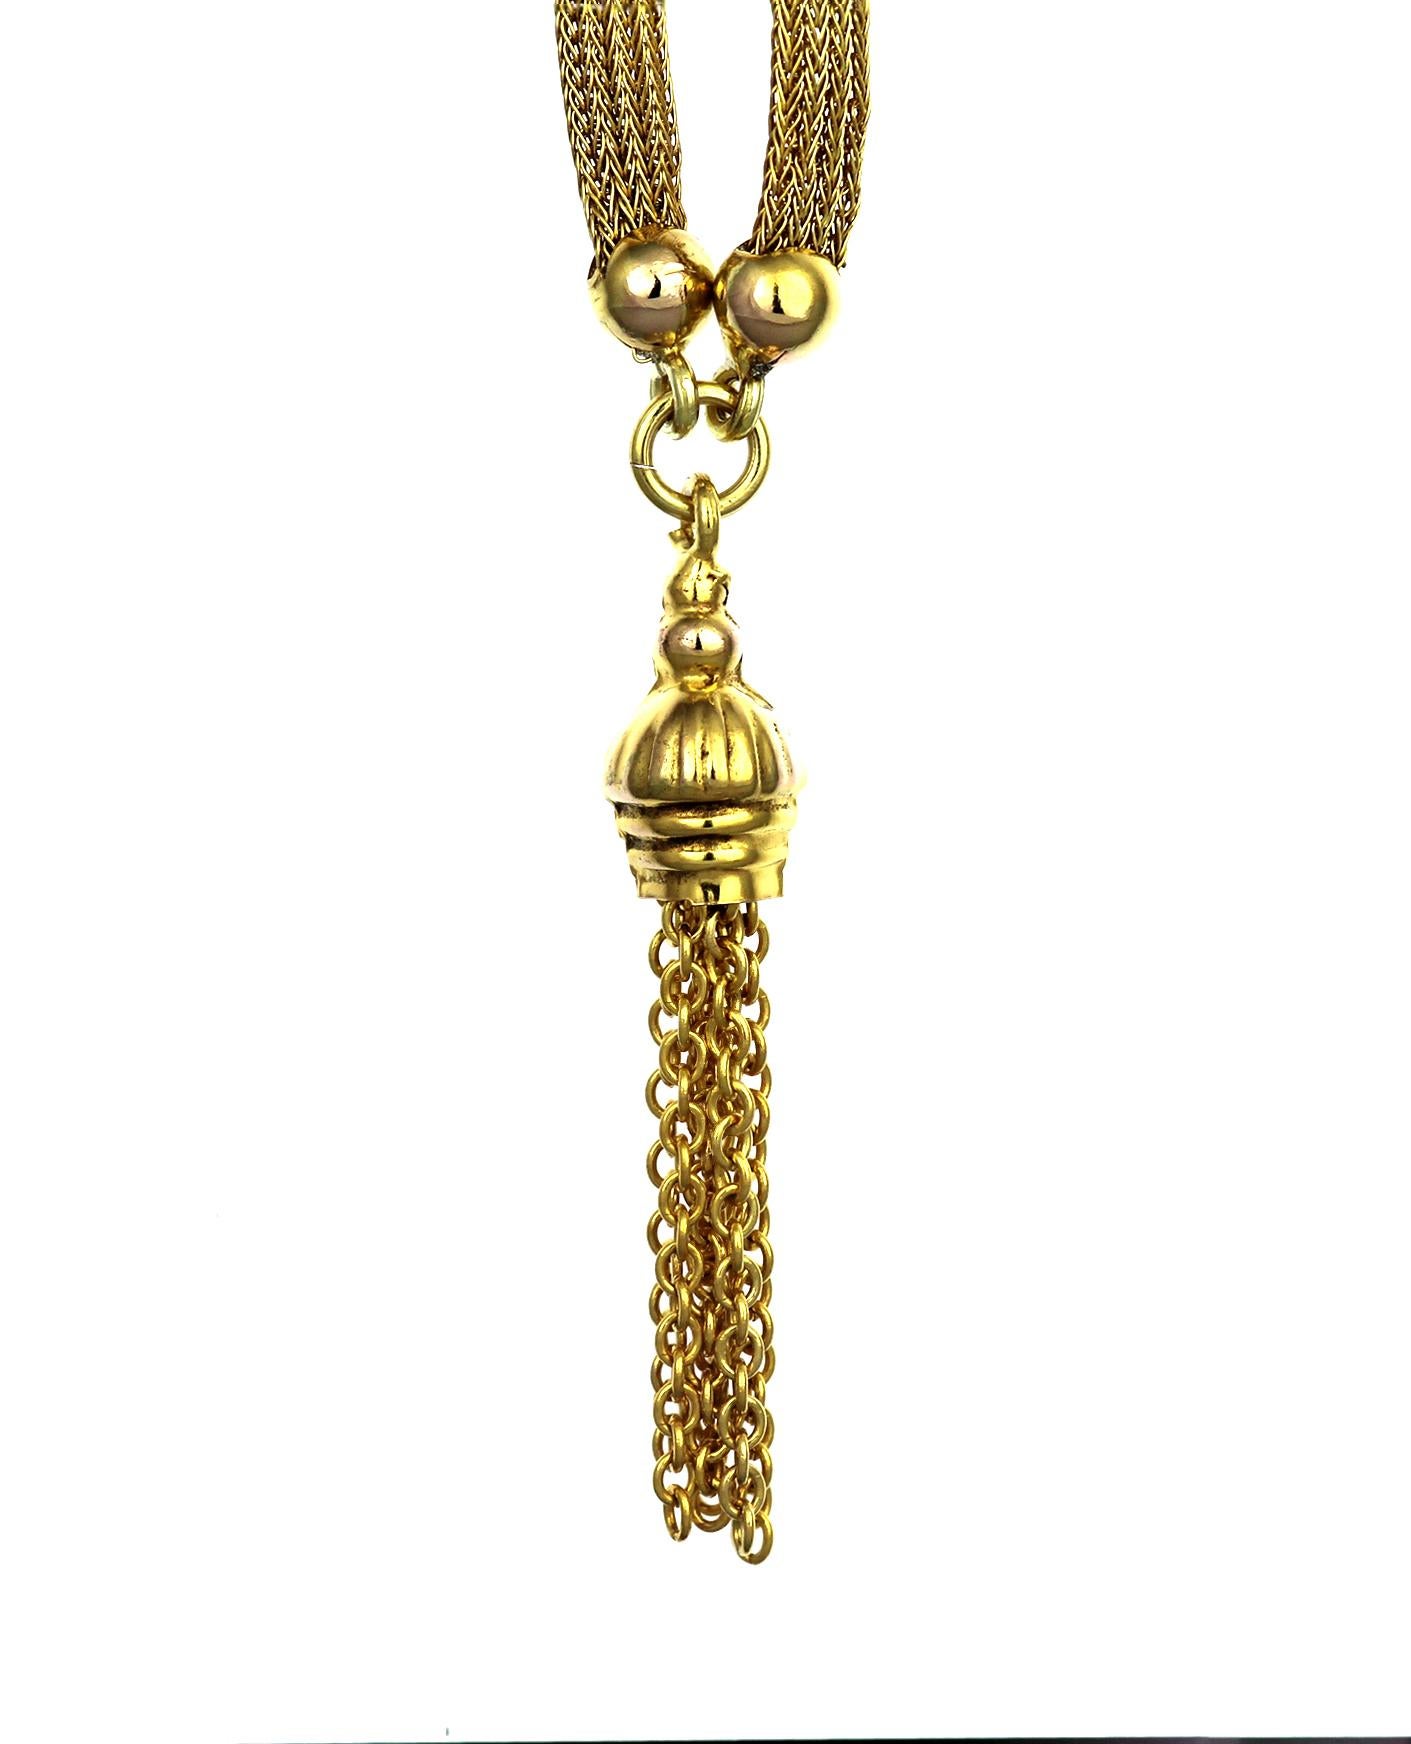 Antique 1880 12K Gold Long Chain/Necklace with Tassel Links with Enamel Panel In Fair Condition For Sale In London, GB